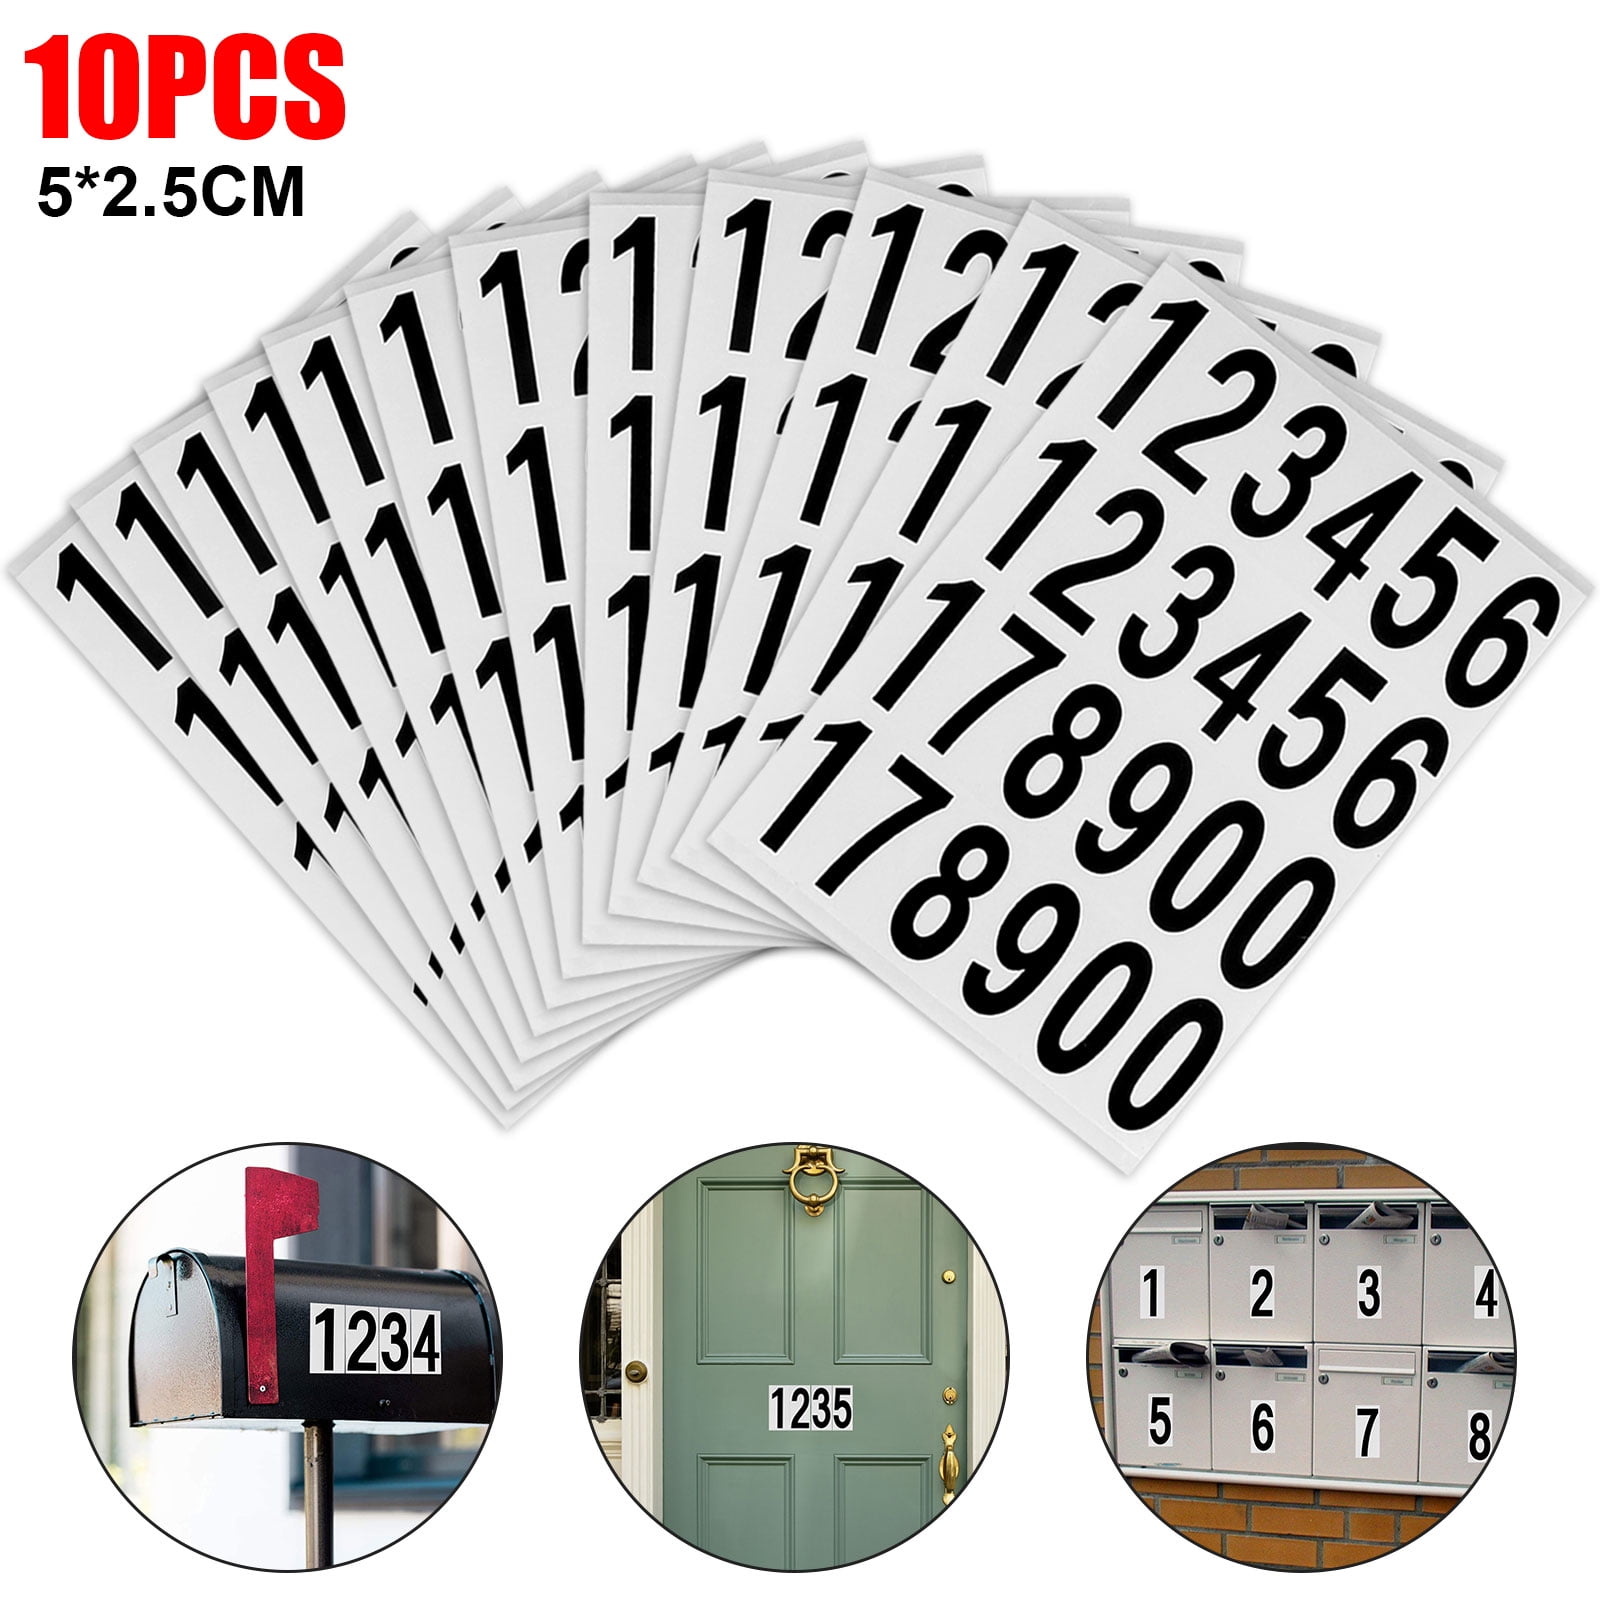 INCH VINYL NUMBERS 0-9 STICKERS STICKY DECALS 1 SHEET 1" 